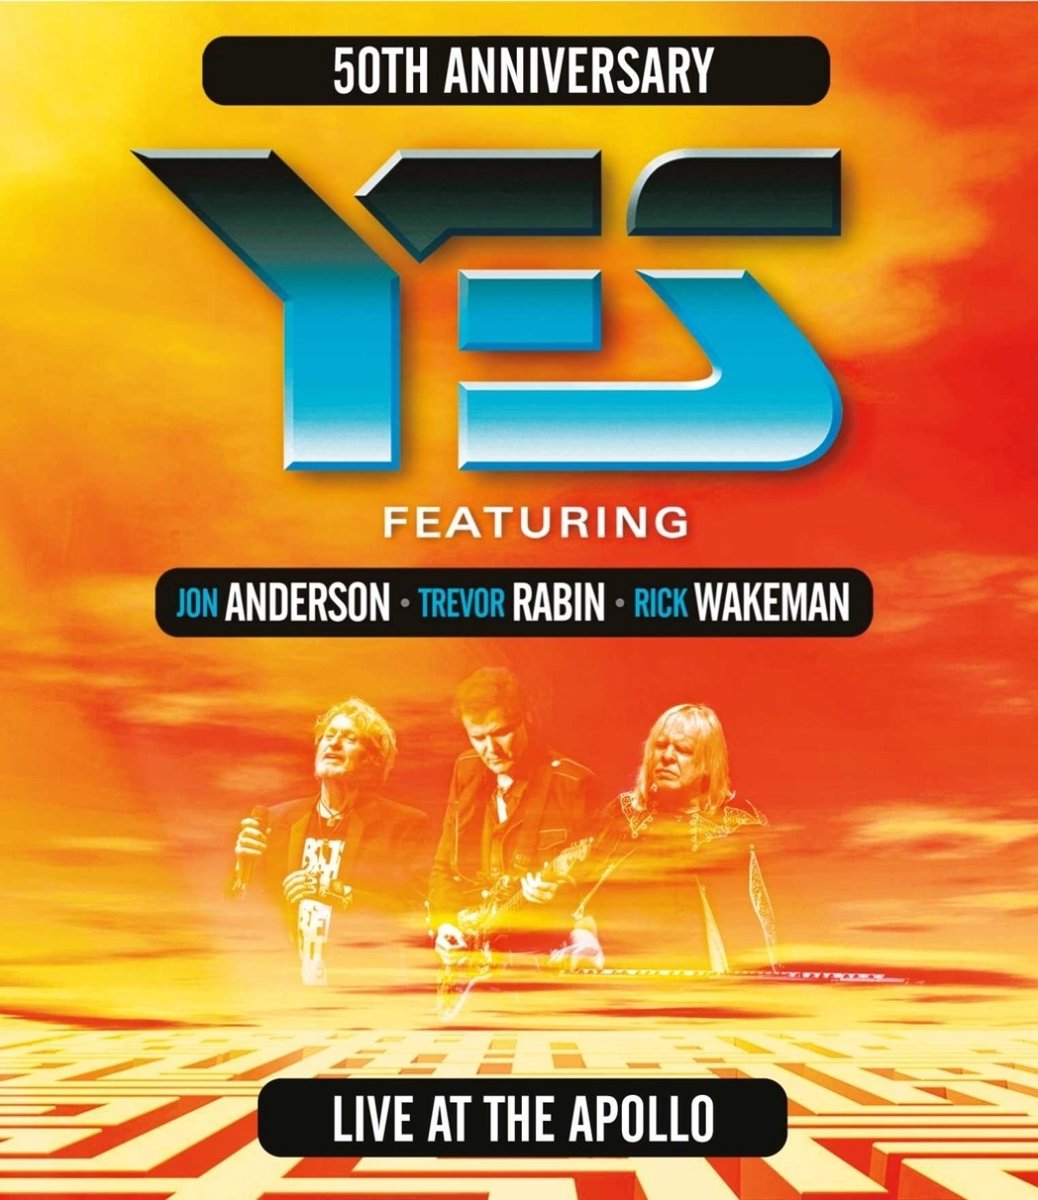 Yes - Live At The Apollo, Manchester (Blu-ray) - Rick Wak Yes Featuring Jon Anderson, Trevor Rabin